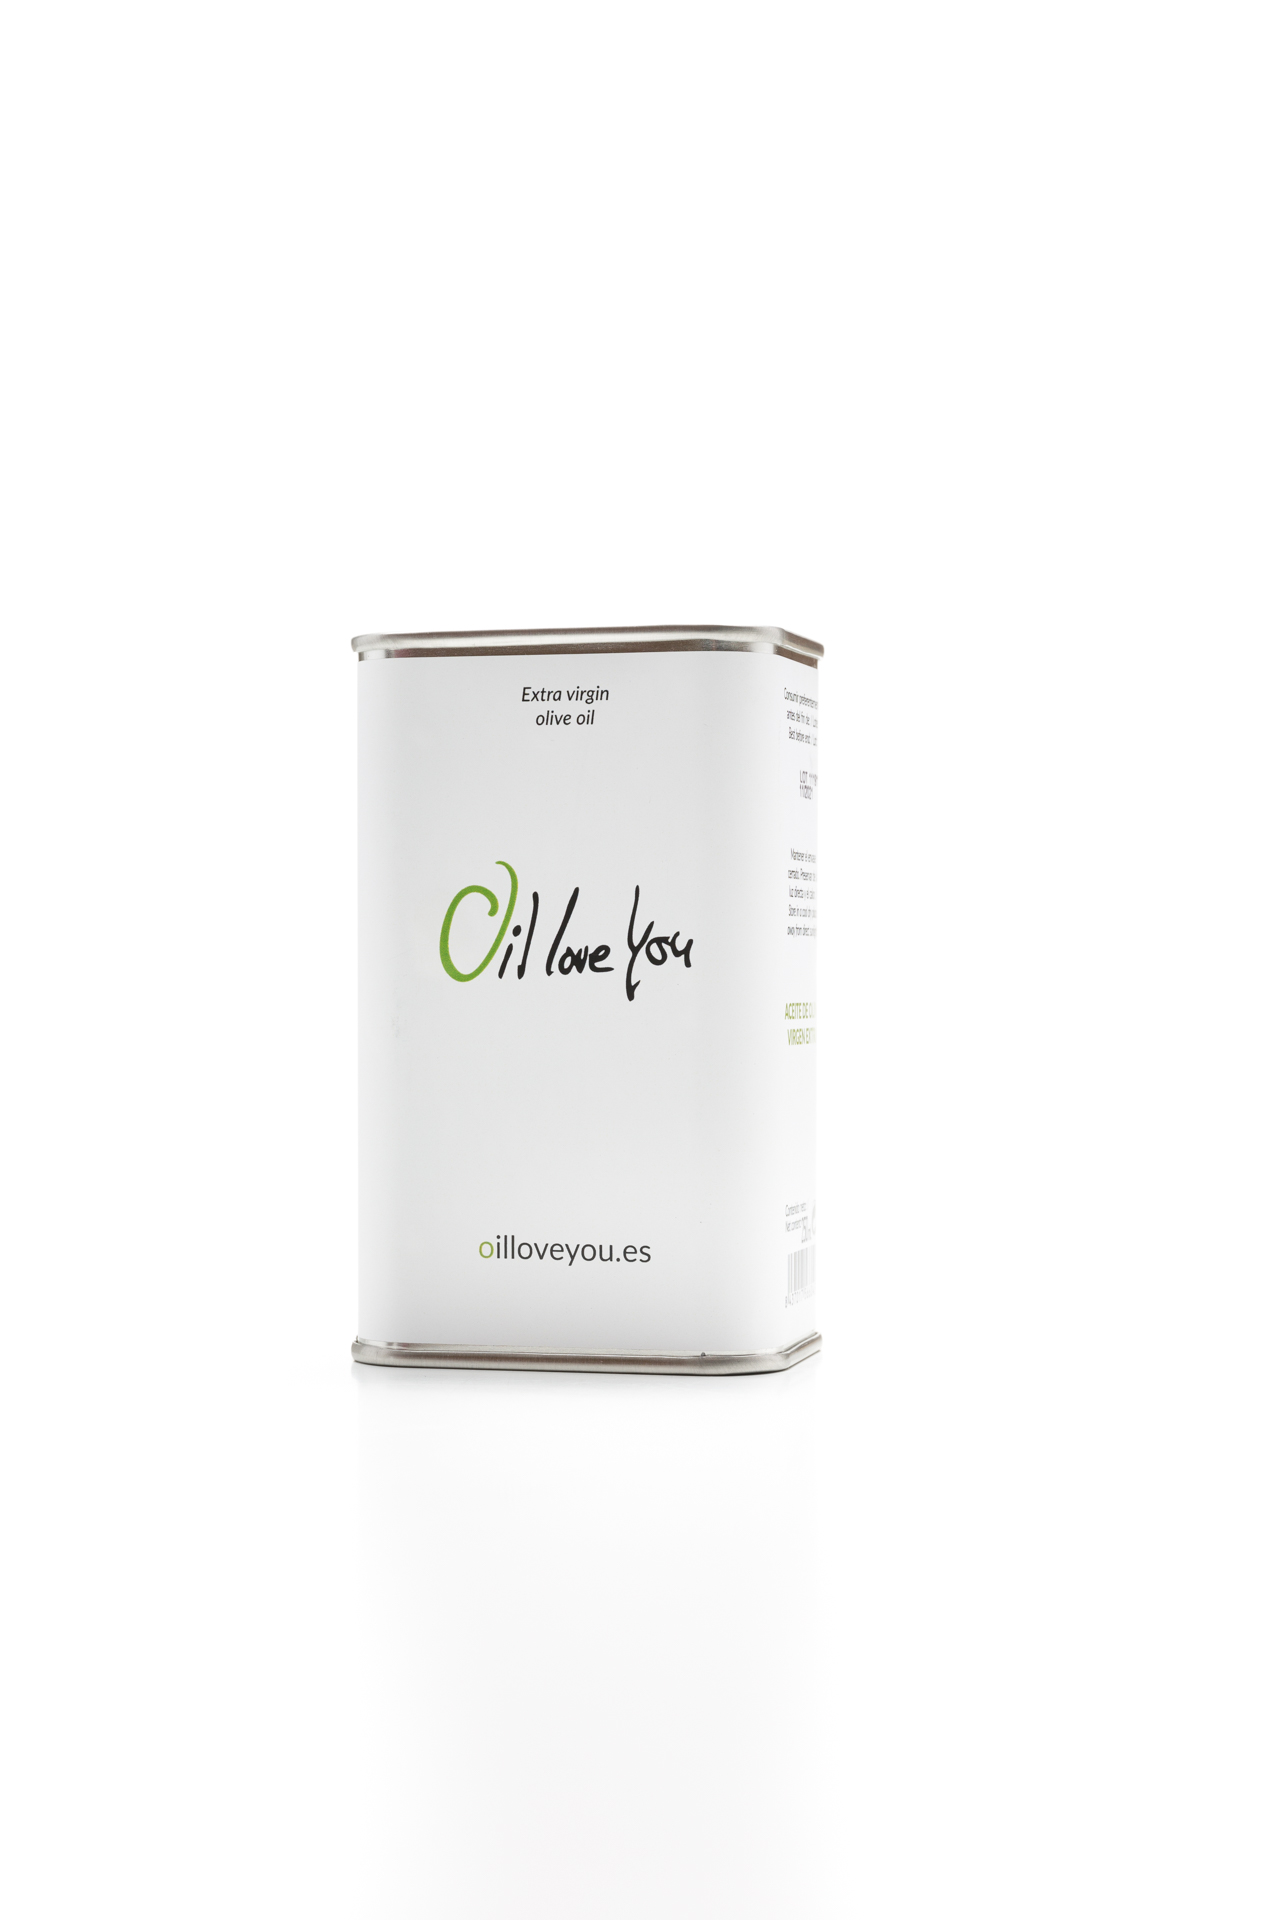 Can of EVOO Oil Love You 250 ml oilloveyou (2)